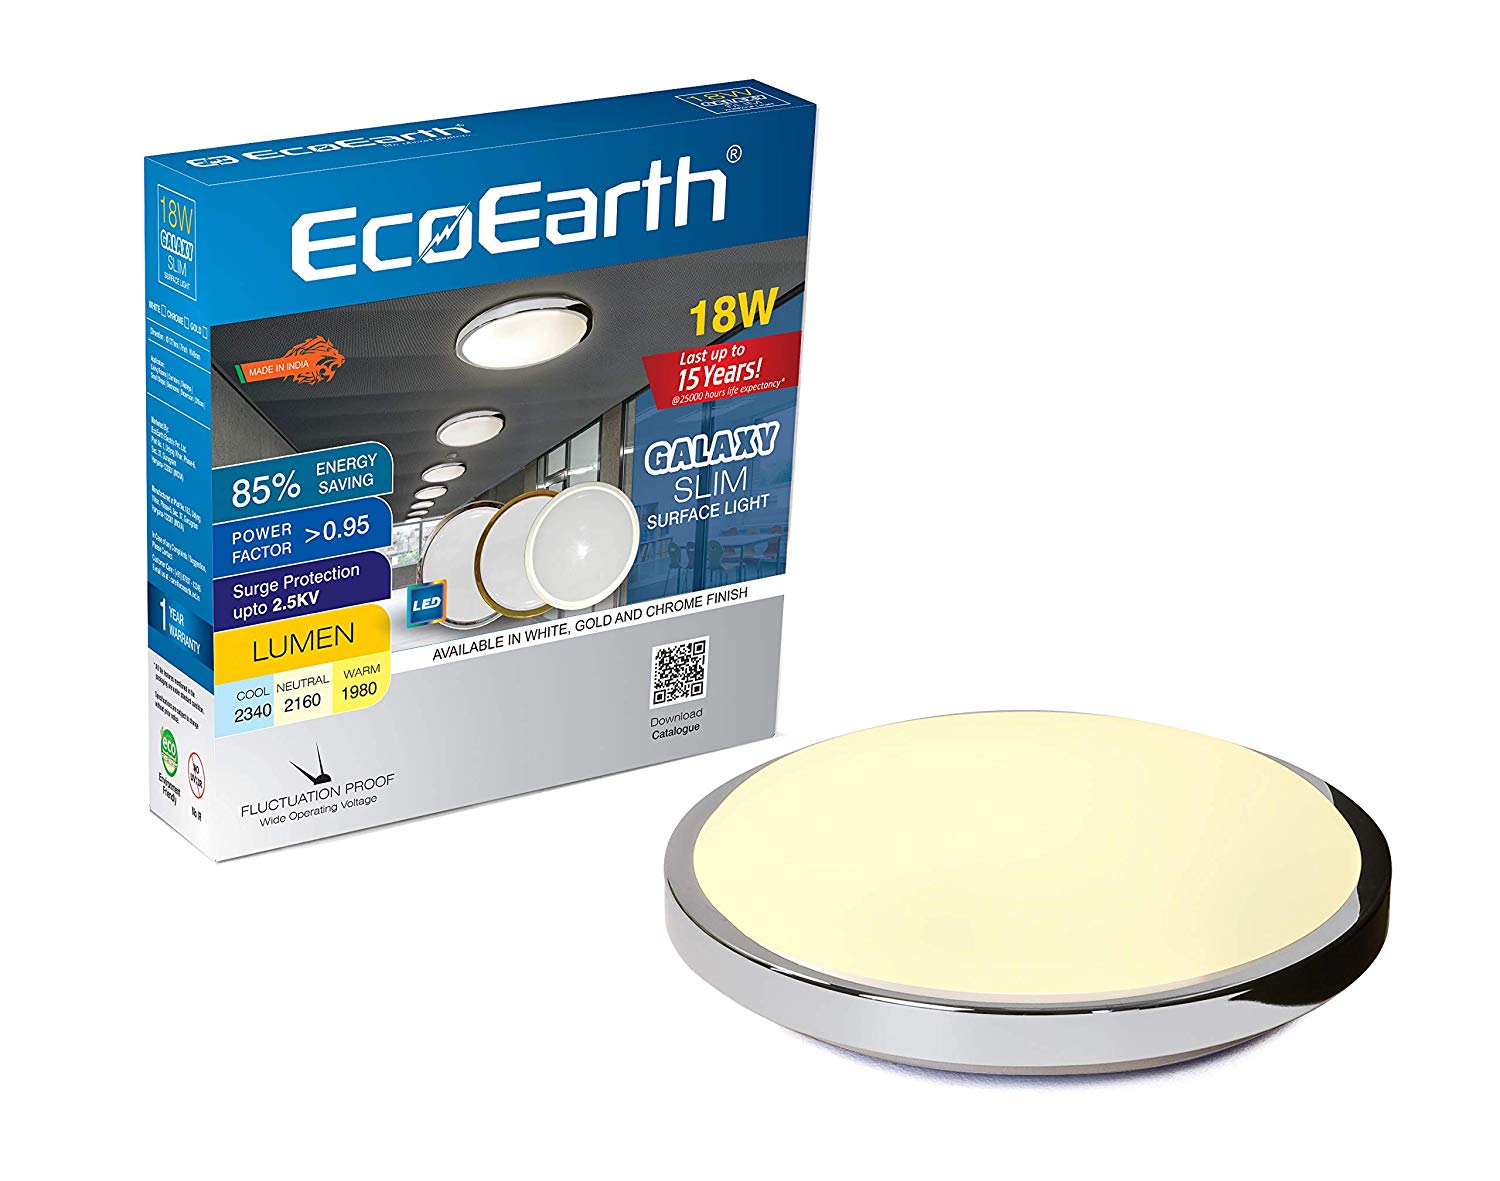 Eco Earth Galaxy 18walt slim round LED surface light warm white golden body chrome pack of 1